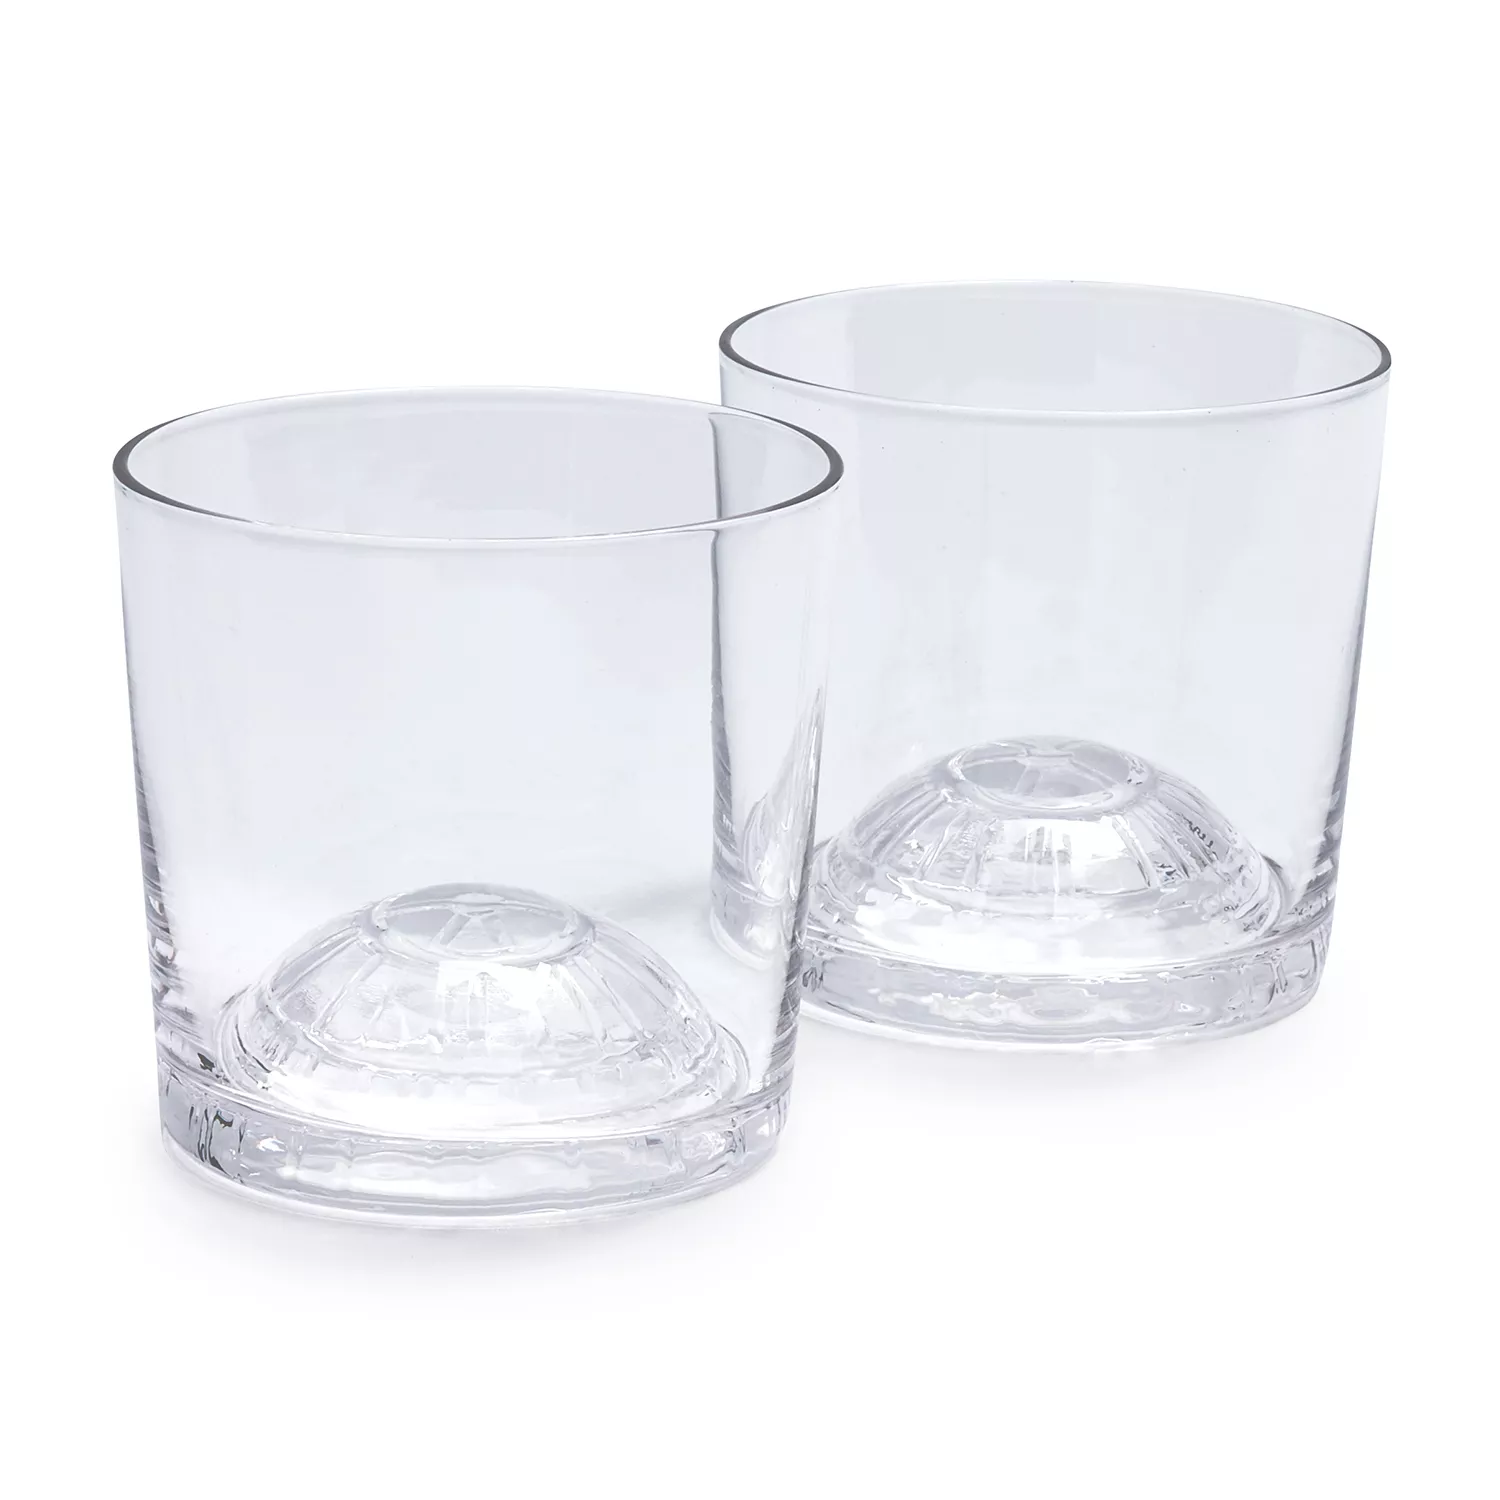 Star Wars Glass Set - Death Star - Collectible Gift Set of 2  Glasses - 10 oz Capacity - Classic Design - Heavy Base: Mixed Drinkware Sets